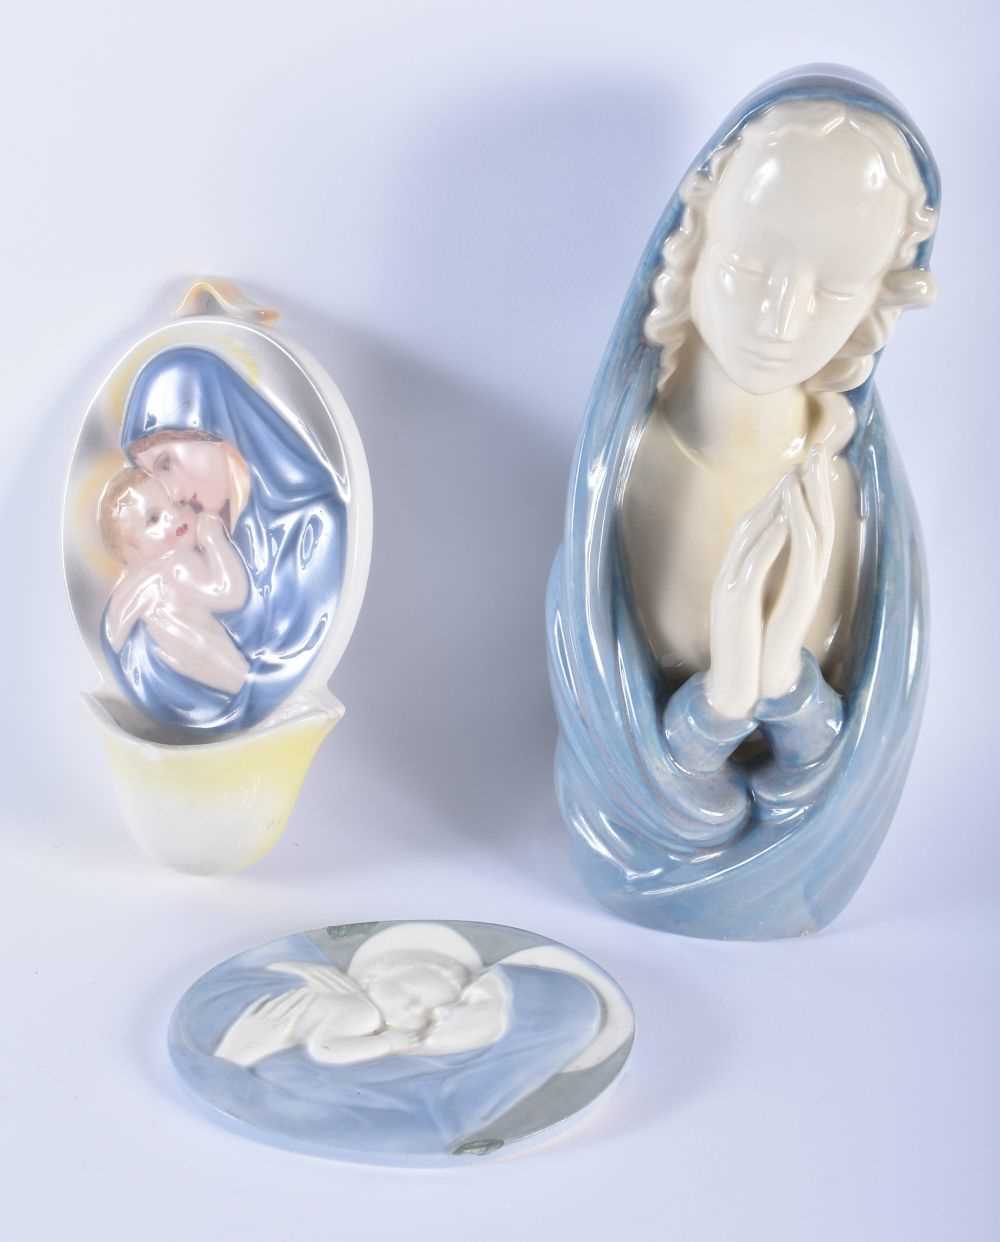 AN AUSTRIAN VIENNA PORCELAIN MADONNA AND CHILD FONT together with a similar English porcelain plaque